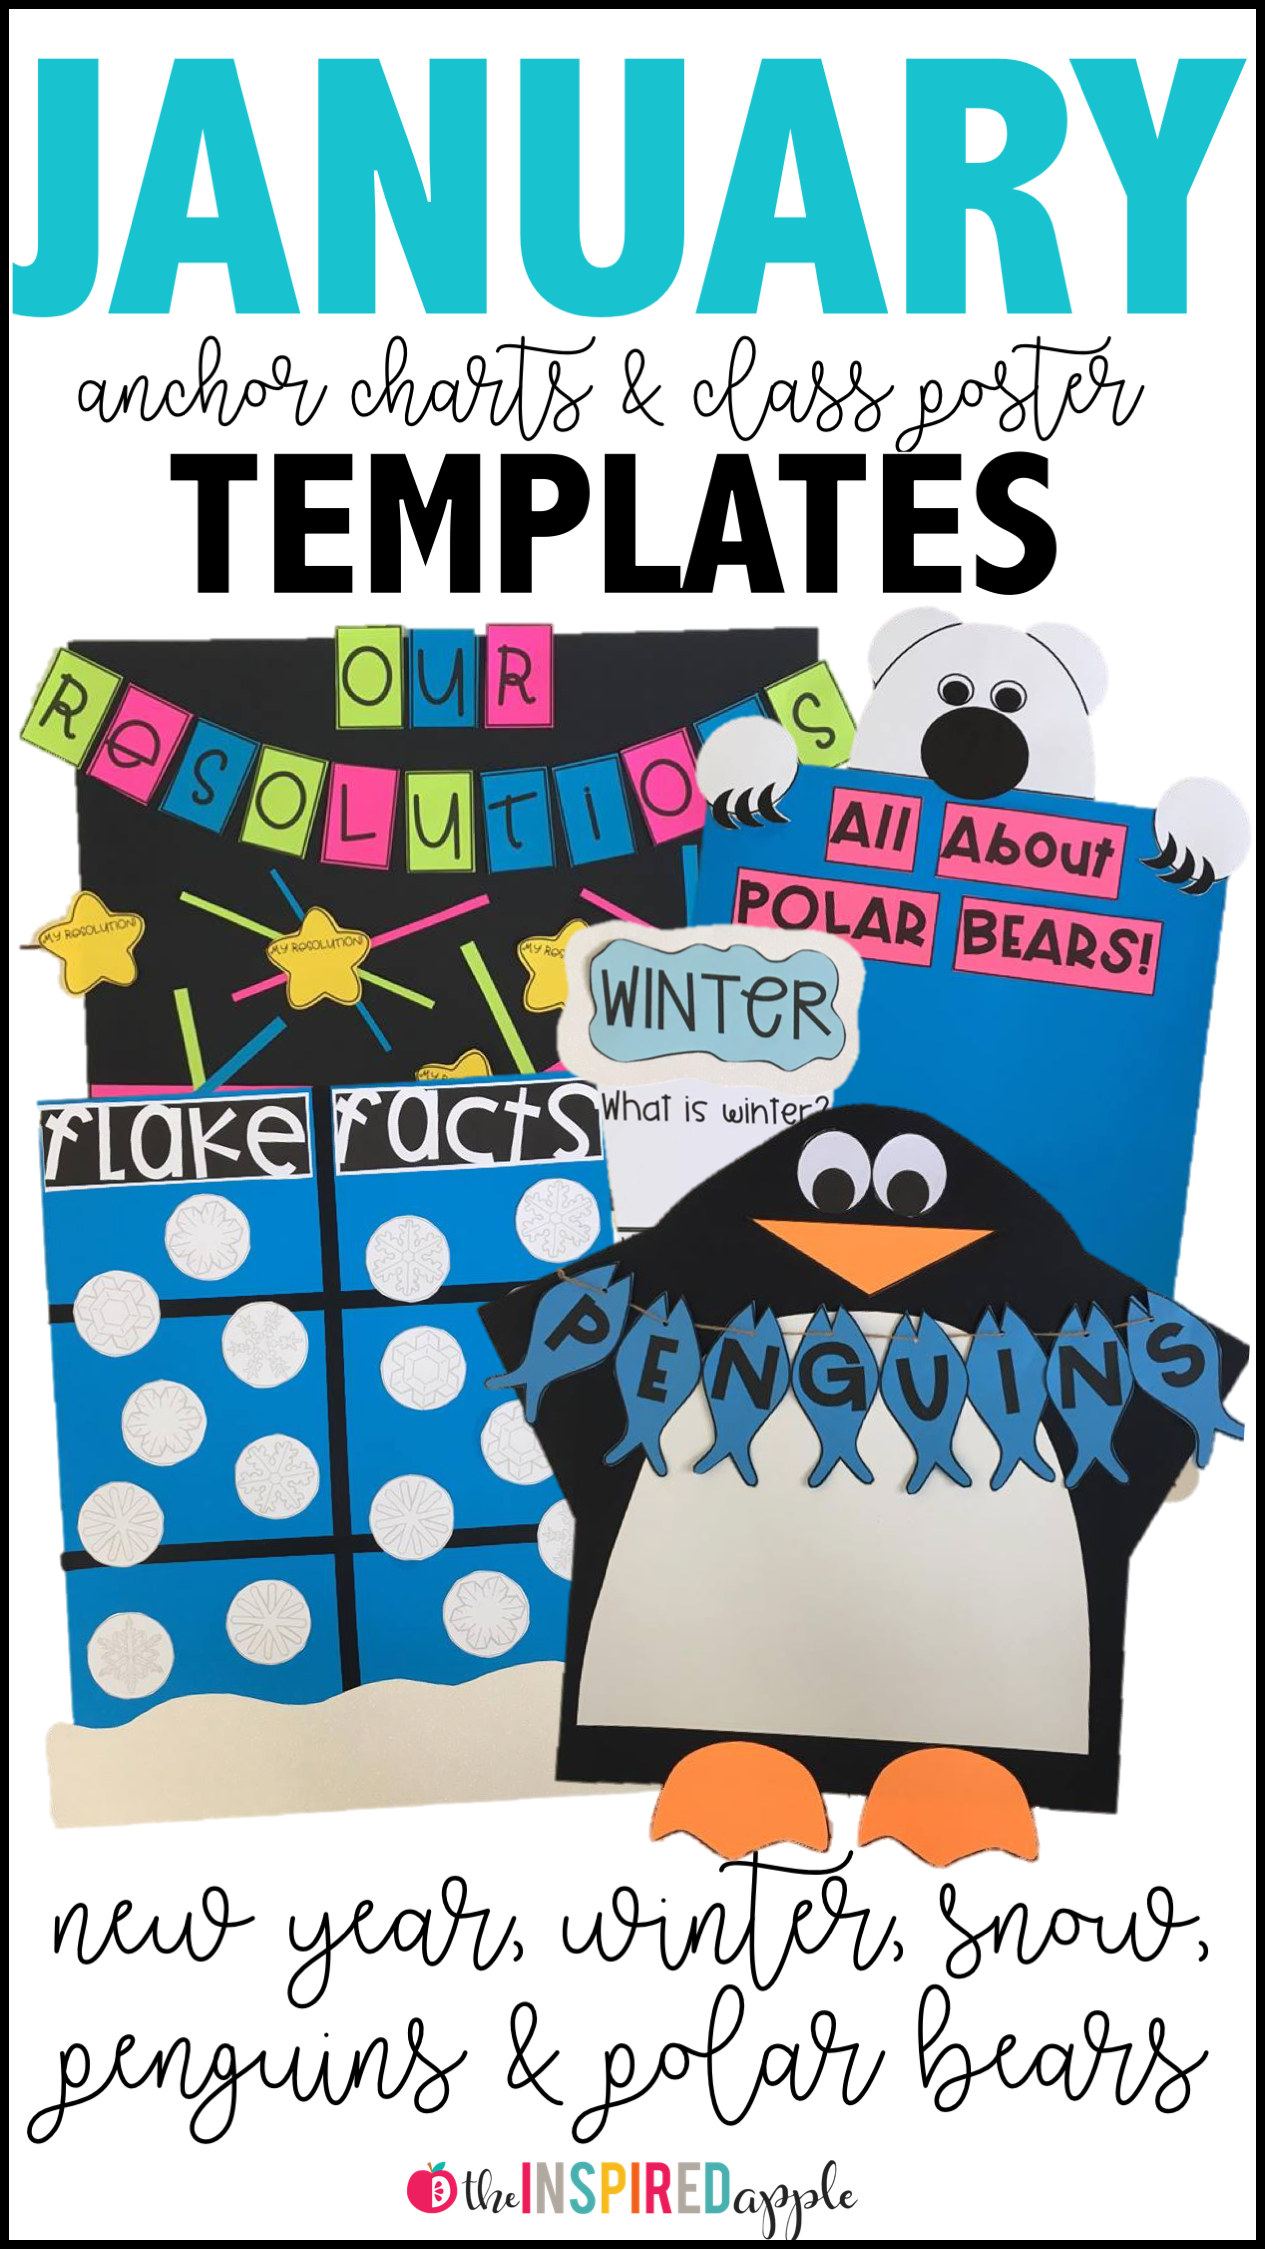 Teachers! How fun are these anchor charts and class posters for the themes you'll study this winter?! New Year, penguins, polar bears, winter, and snow are all included in this set of quick and easy templates for creating adorable accents for your class. They will work great for preschool, kindergarten, first grade, and second grade classrooms!